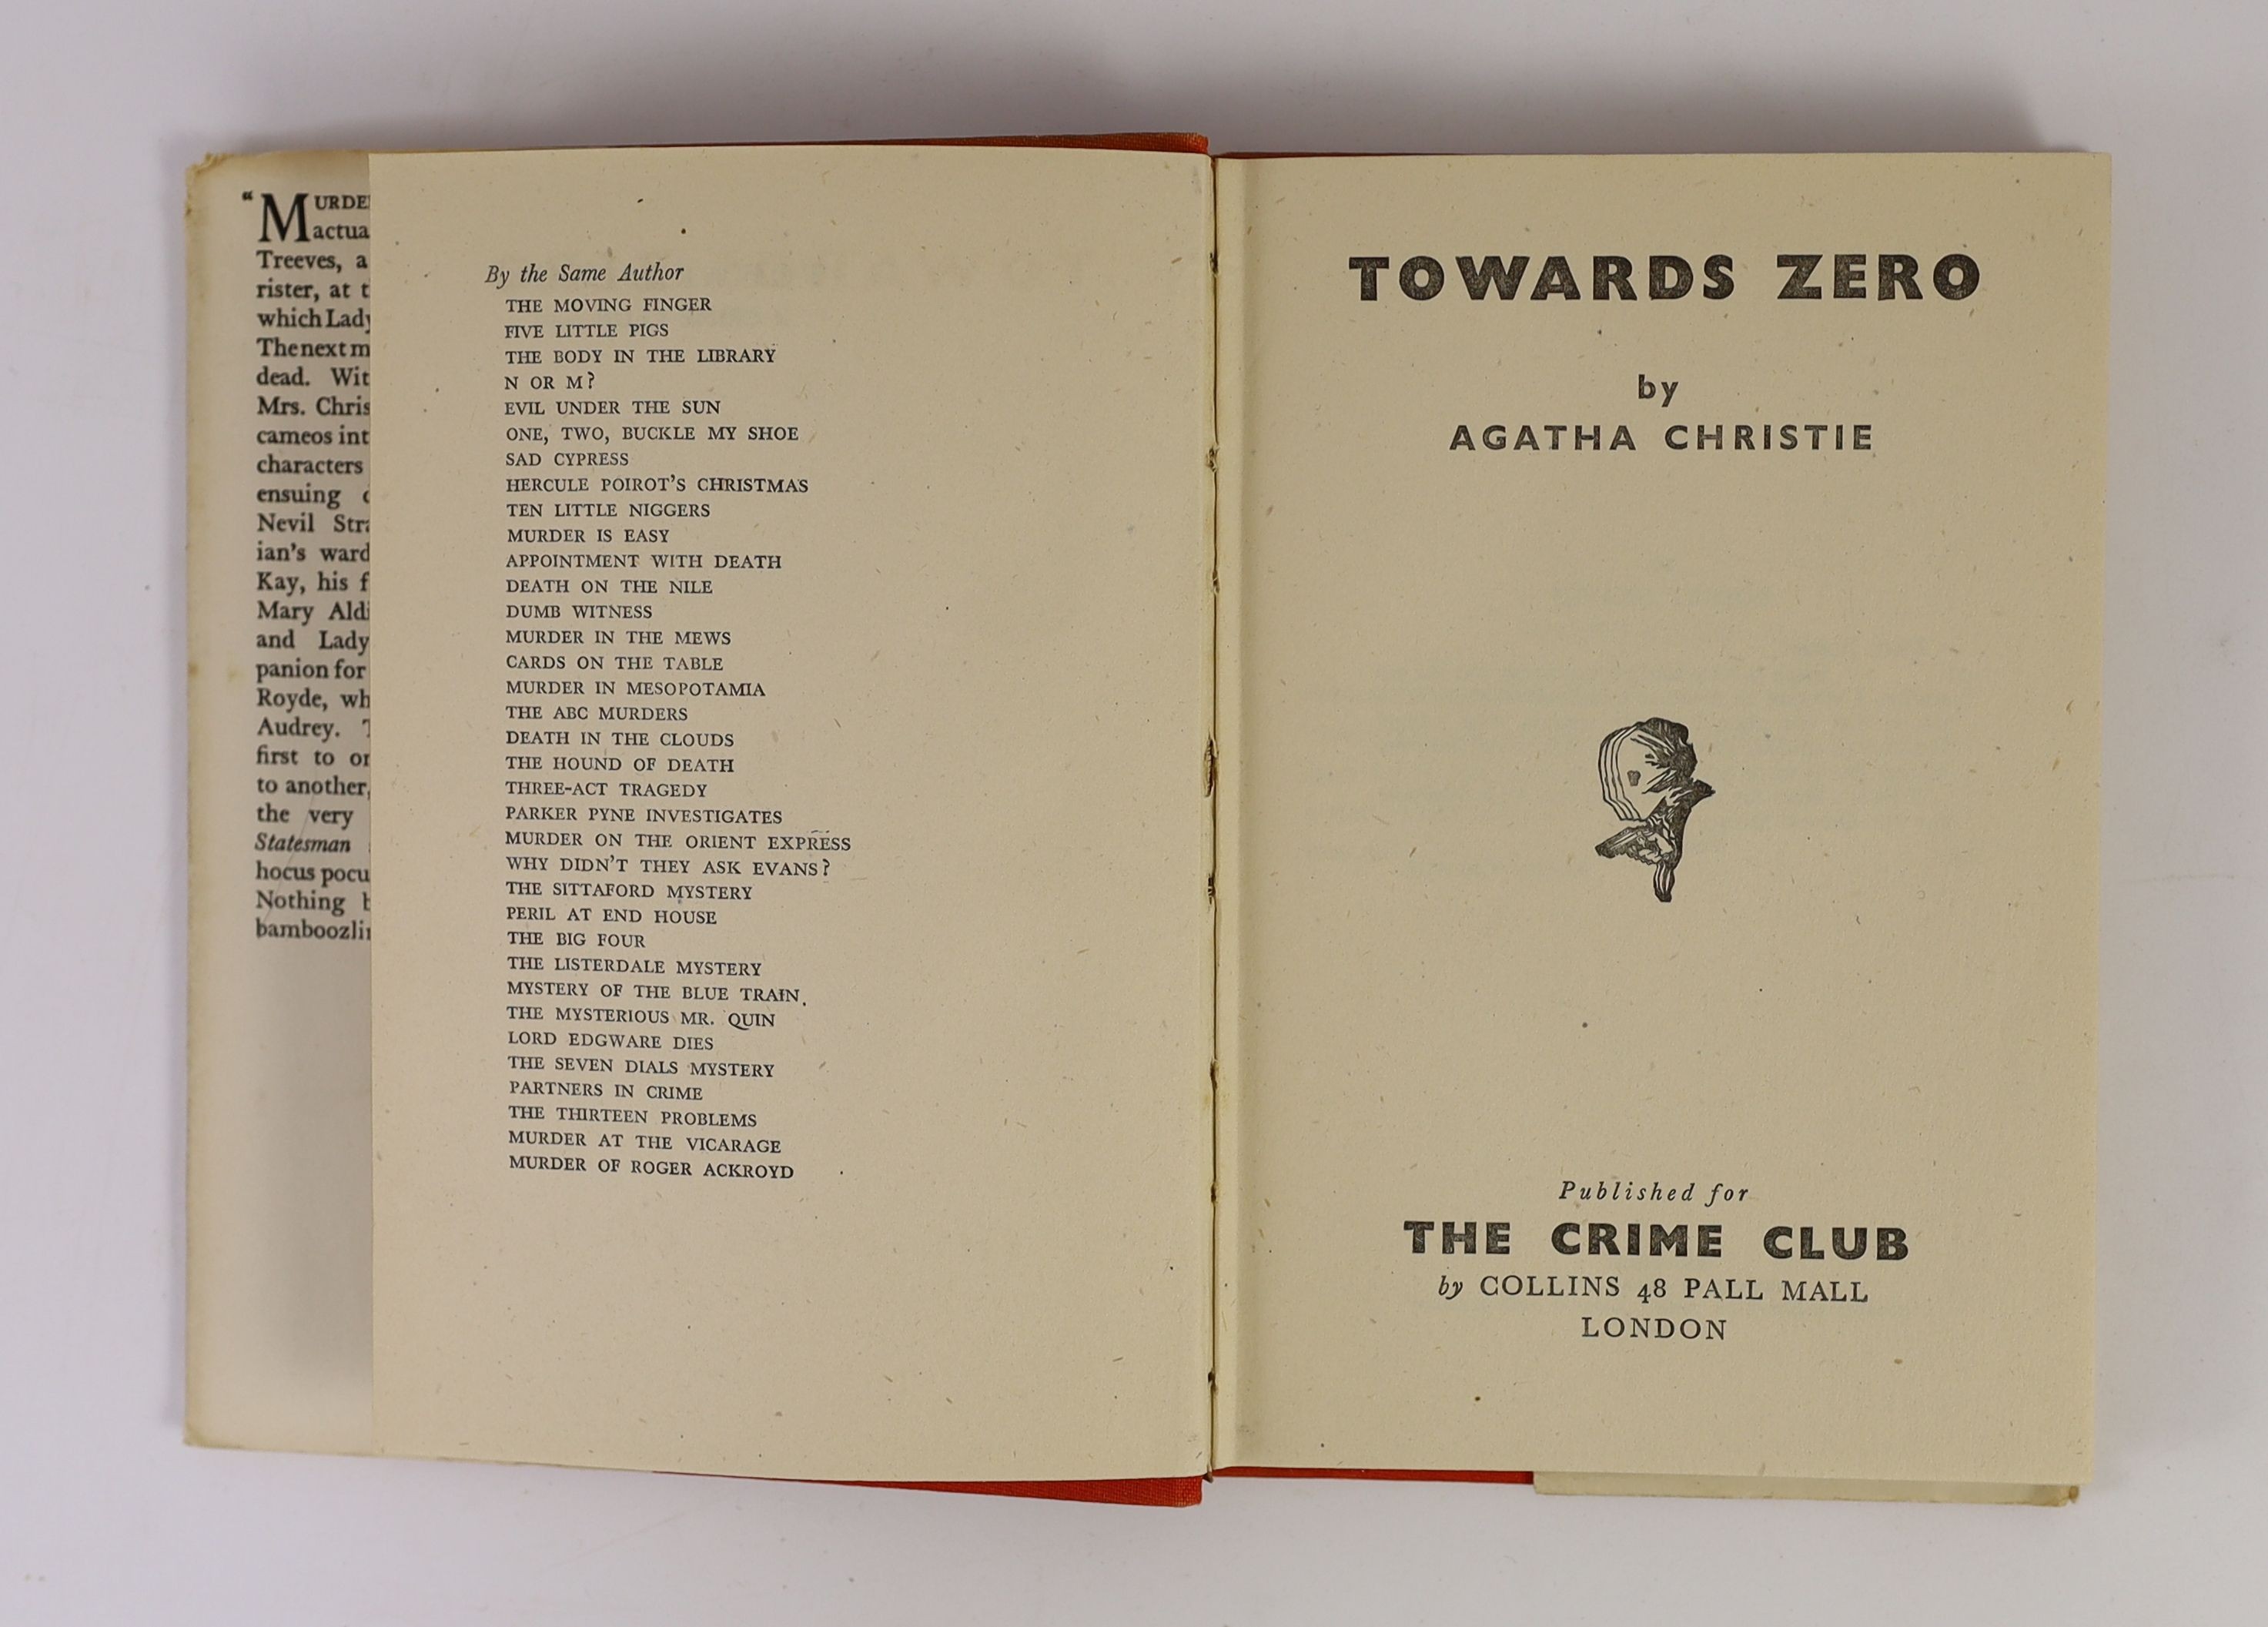 Christie, Agatha - Towards Zero, 1st edition, 8vo, cloth, in torn, unclipped d/j, ownership inscription to front fly leaf, The Crime Club, London, 1944 and Murder in the Mews, 3rd impression, 8vo, cloth, in unclipped d/j